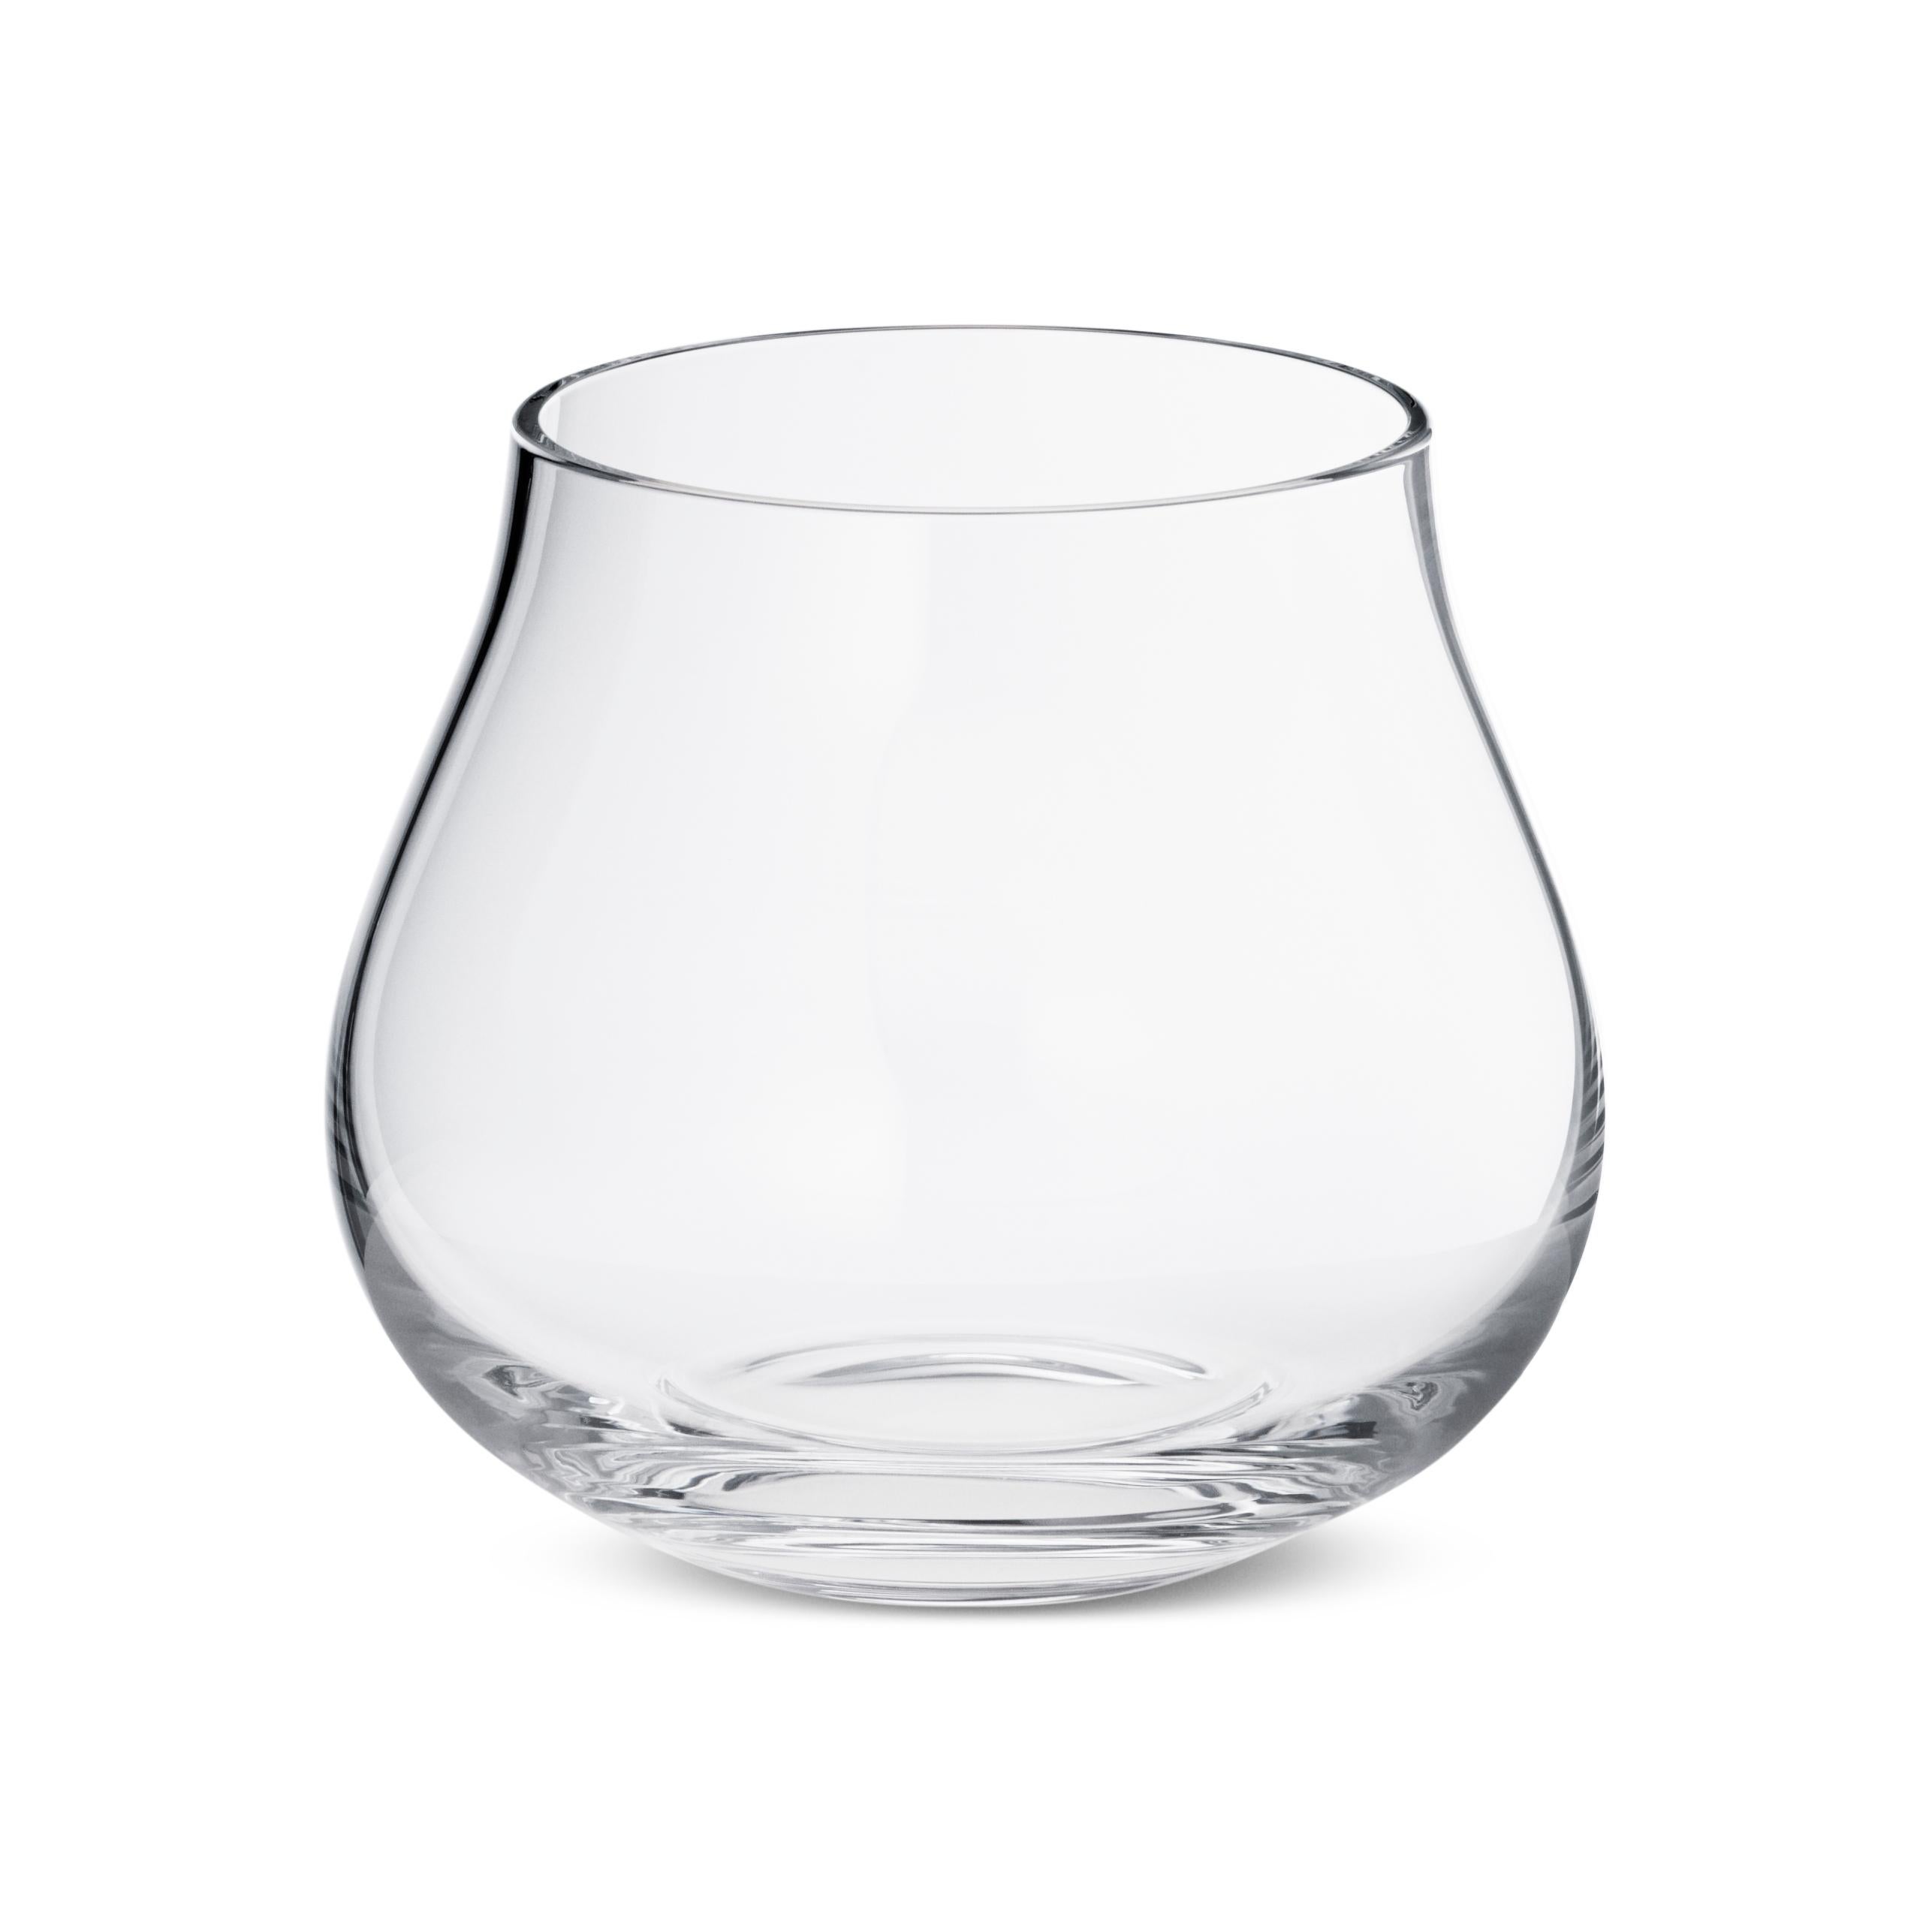 A perfect example of contemporary Scandinavian design, this set of six lead-free crystal tumblers combines sophisticated good looks with true functionality. The organic shape adds a sculptural aspect to the dining table and also feels comfortable in